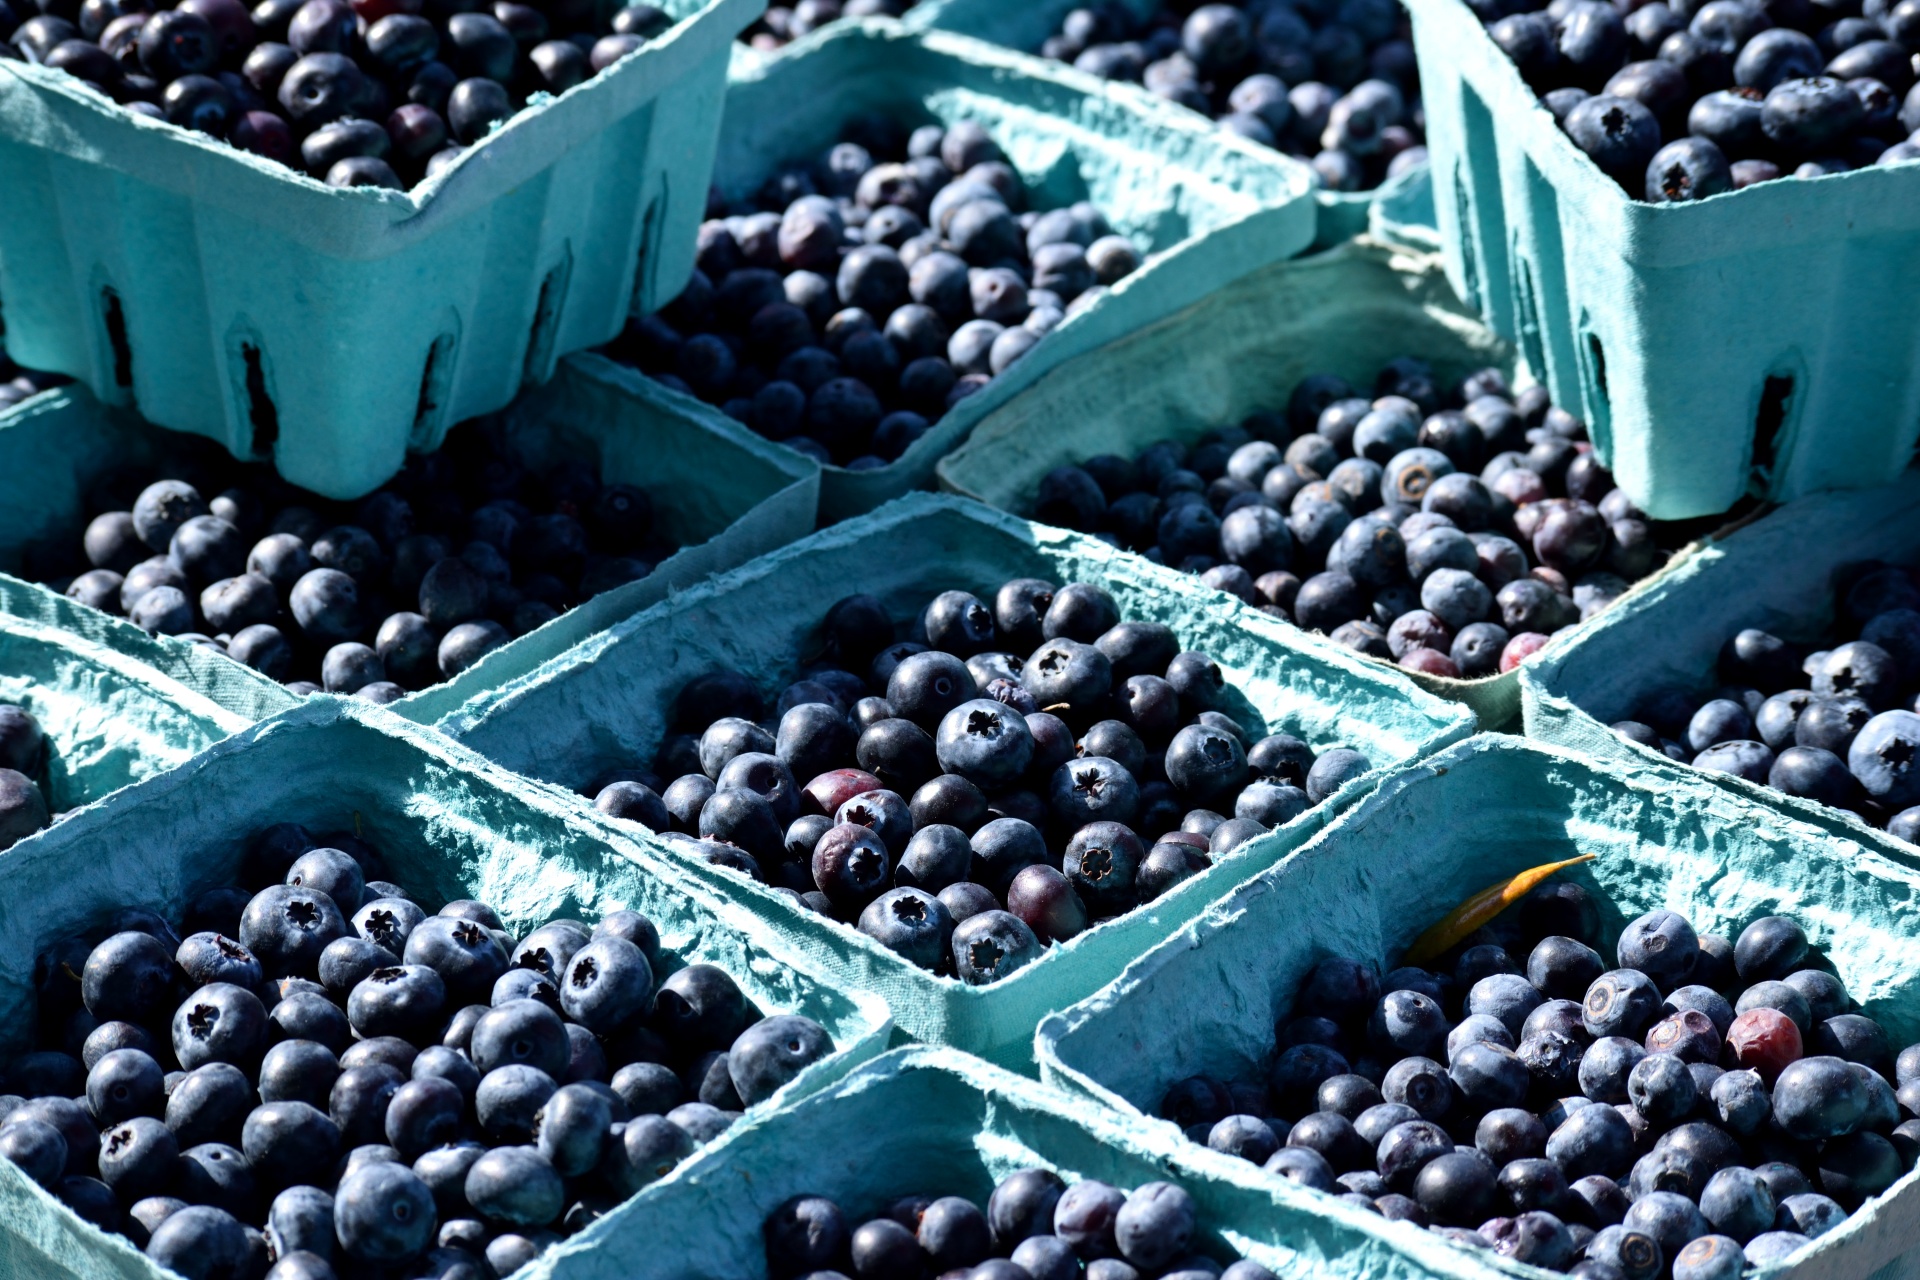 blue berries for sale at market place